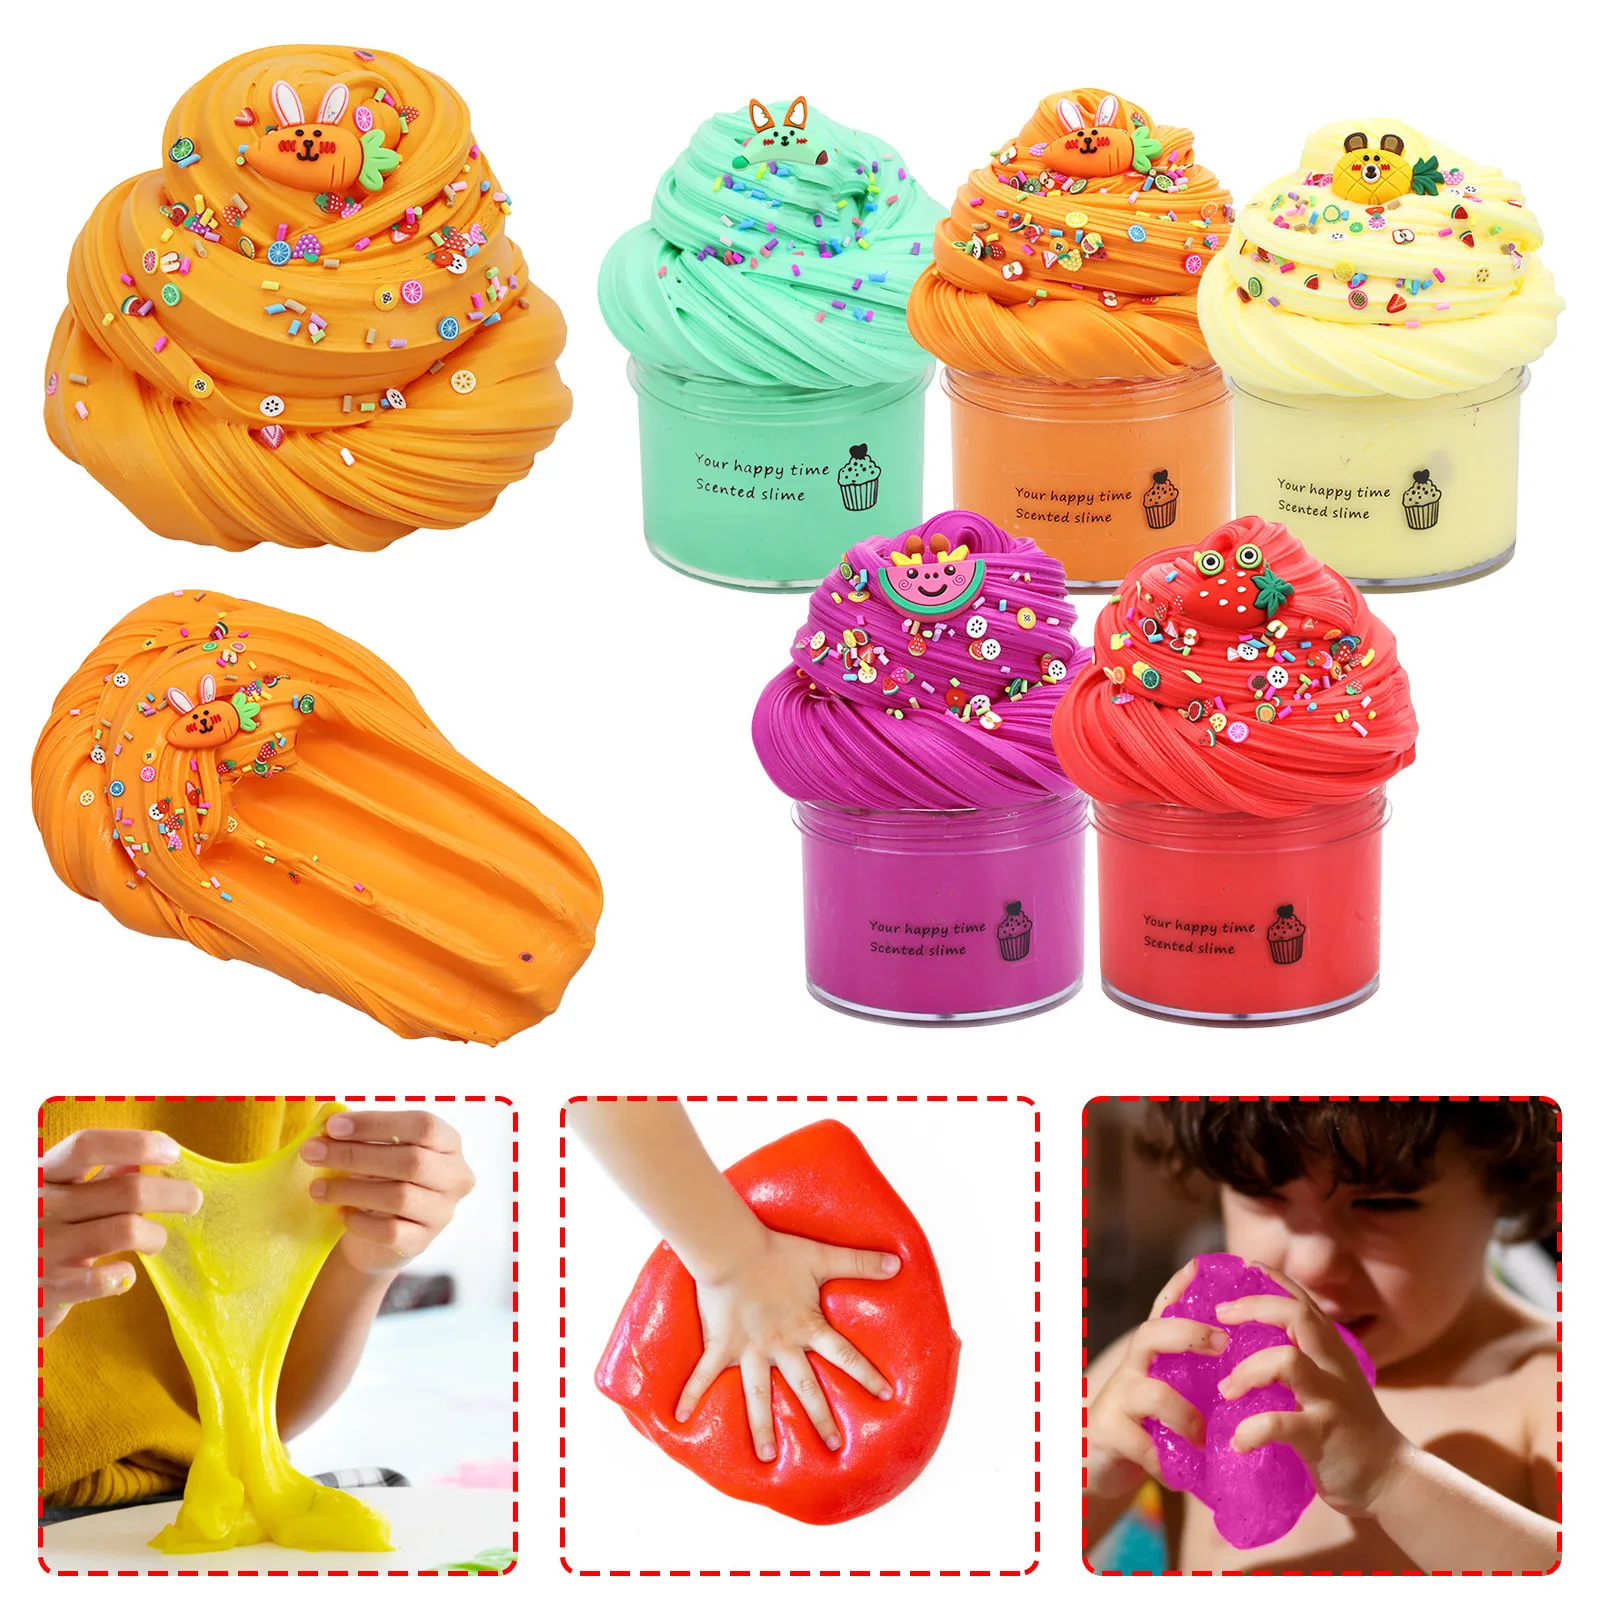 1 Piece Fruit Slime Fluffy Slime Multicolor Non-Sticky Slime Toy Stress Relief Toy 70ml for Birthday Gift Children/'s Day Gift